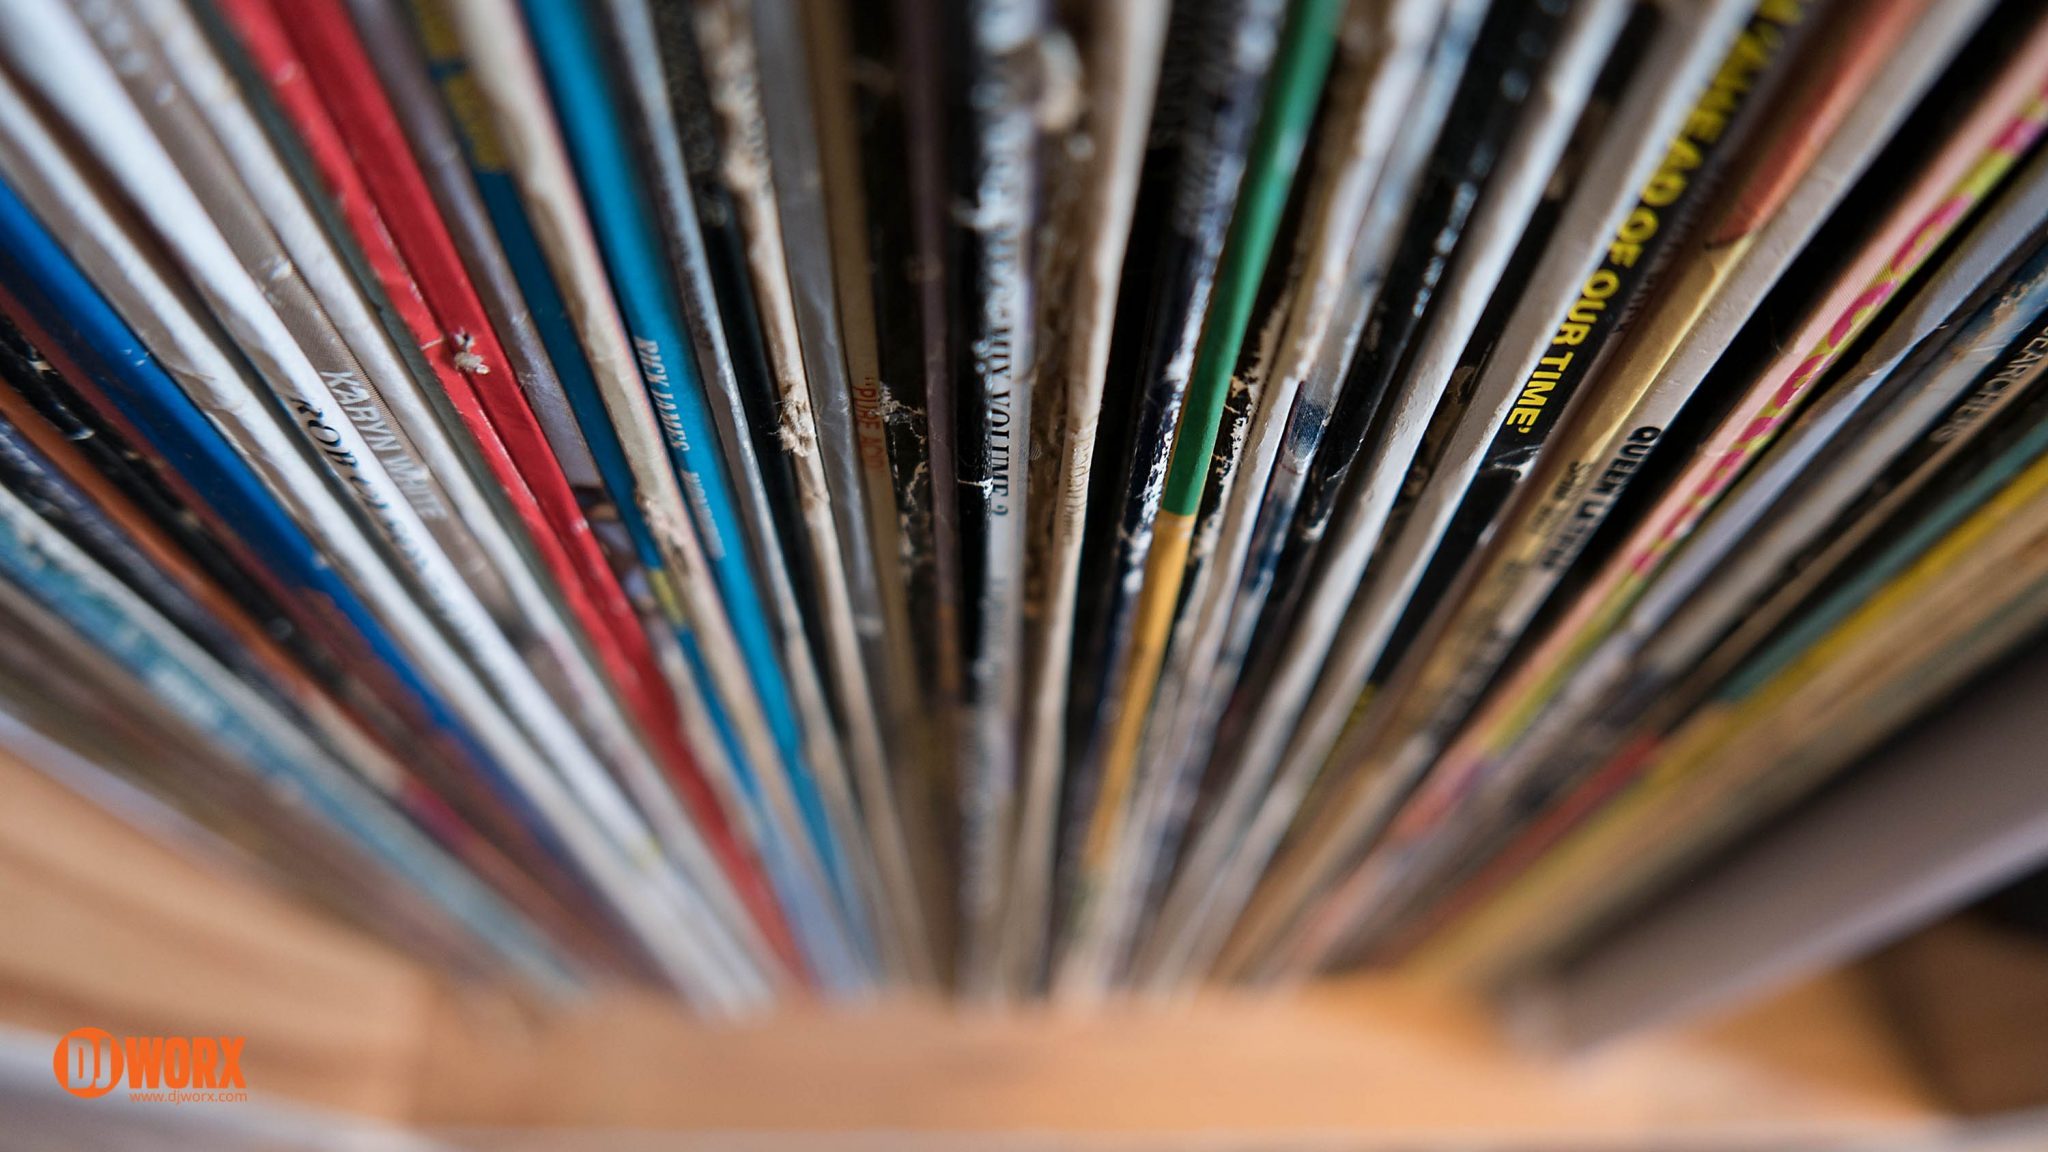 Why do I keep a vinyl collection that I don't play? • DJWORX